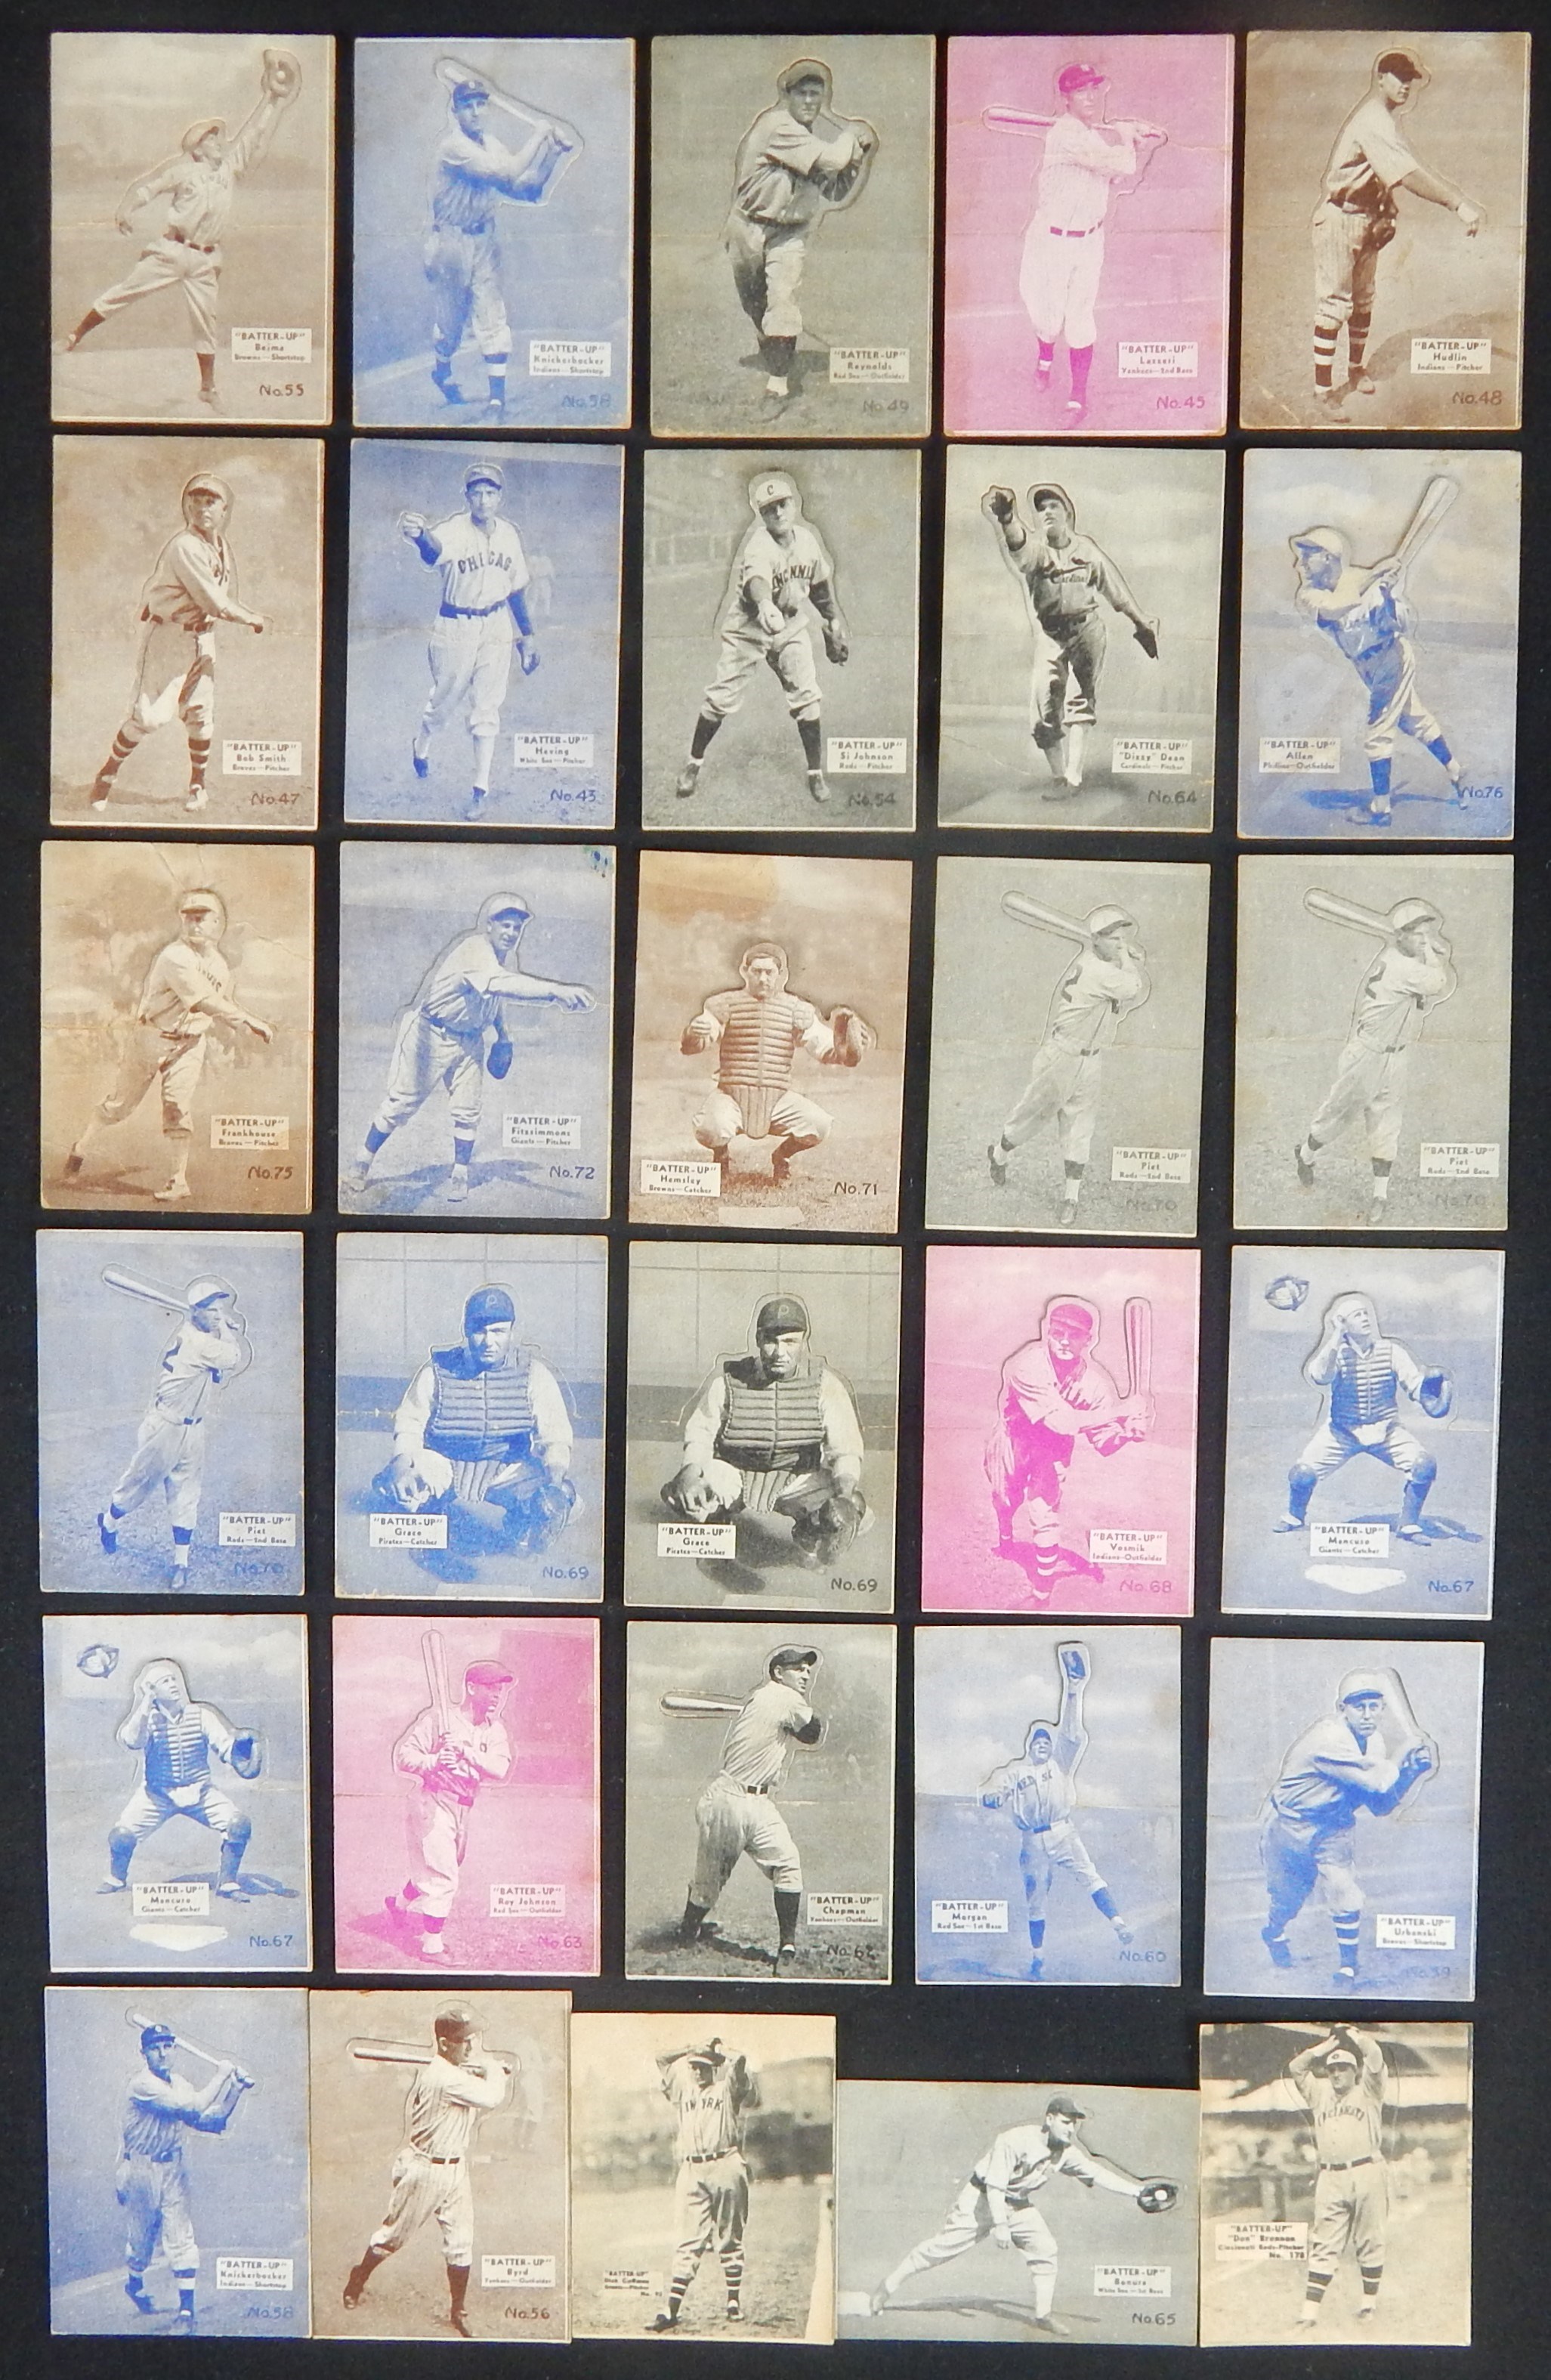 1934-36 "Batter Up" Collection of 30 cards w/Lazzeri and Dean